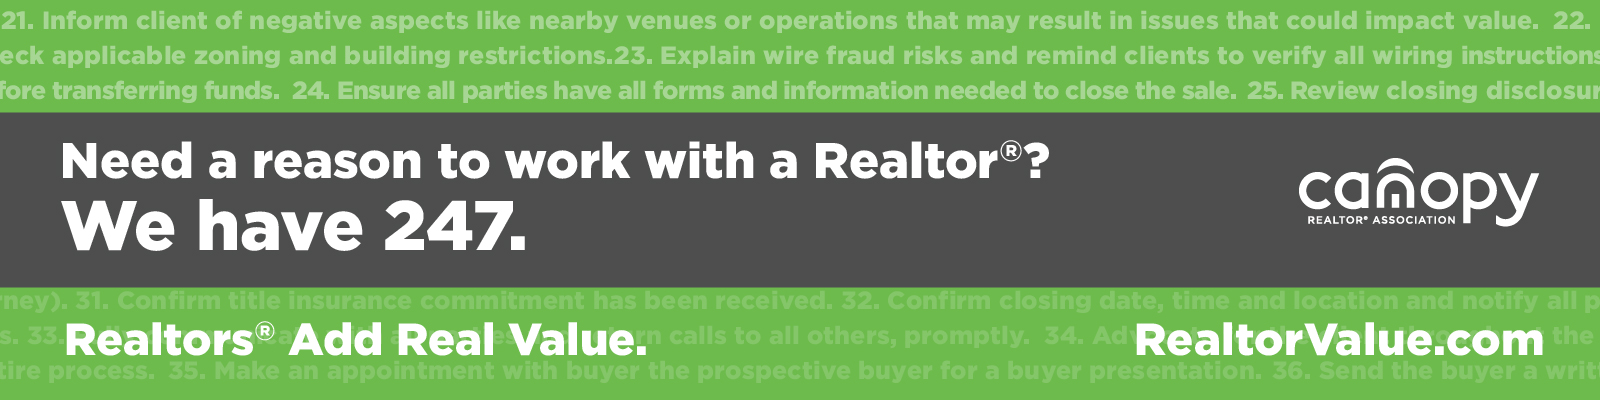 Need a reason to work with a Realtor®? We have 247.